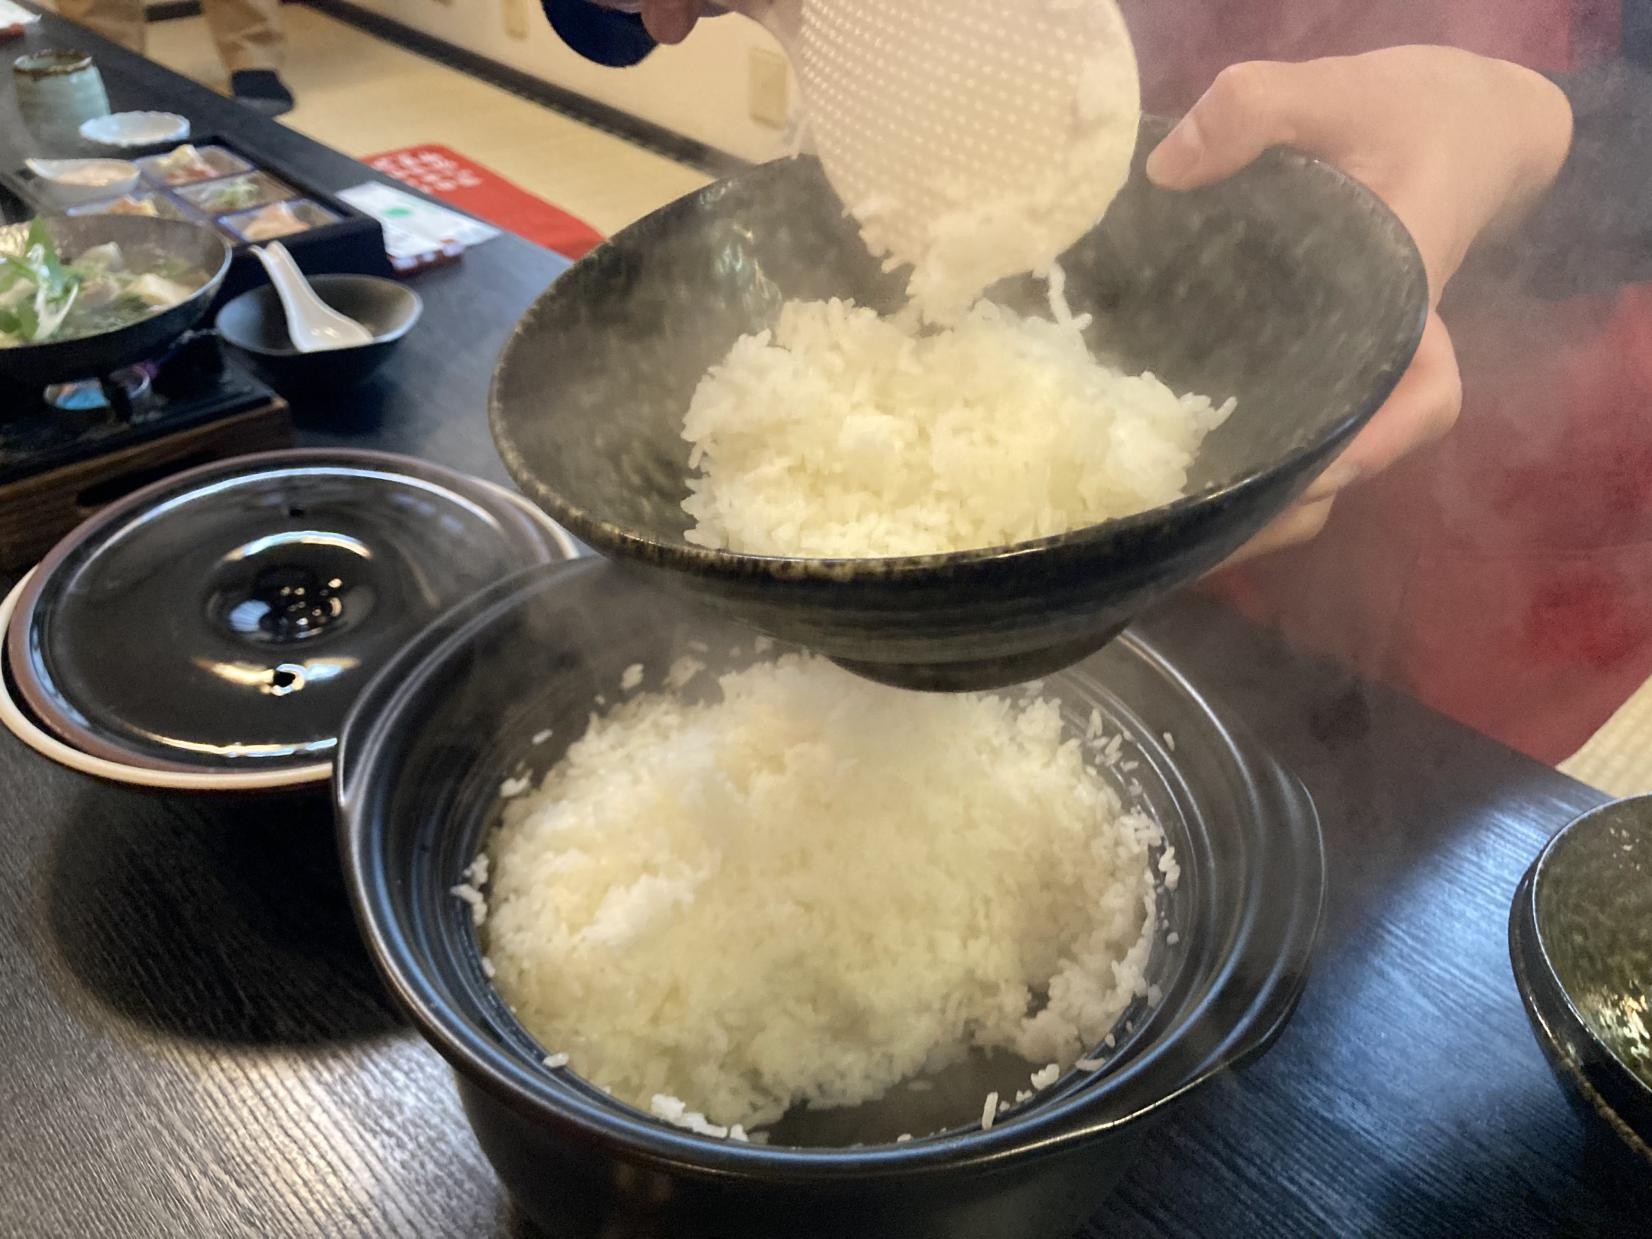 ”HANIWA" Yusui Specialty: Hotpot Rice Meal using Local Spring Water-1